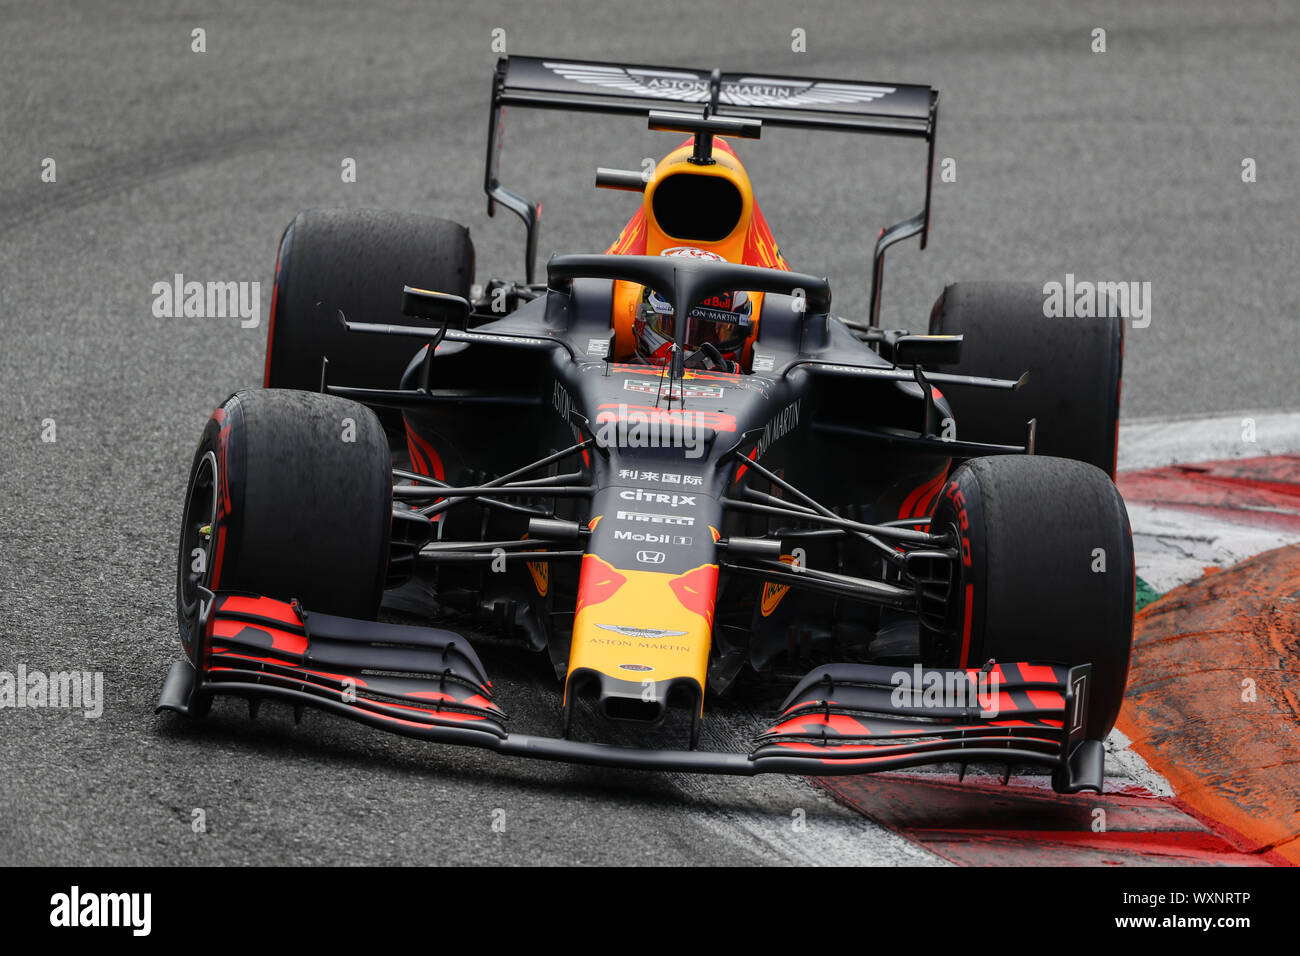 Max Verstappen of Aston Martin Red Bull Racing during Formula 1 Gp of Italy 2019 in Monza Stock Photo